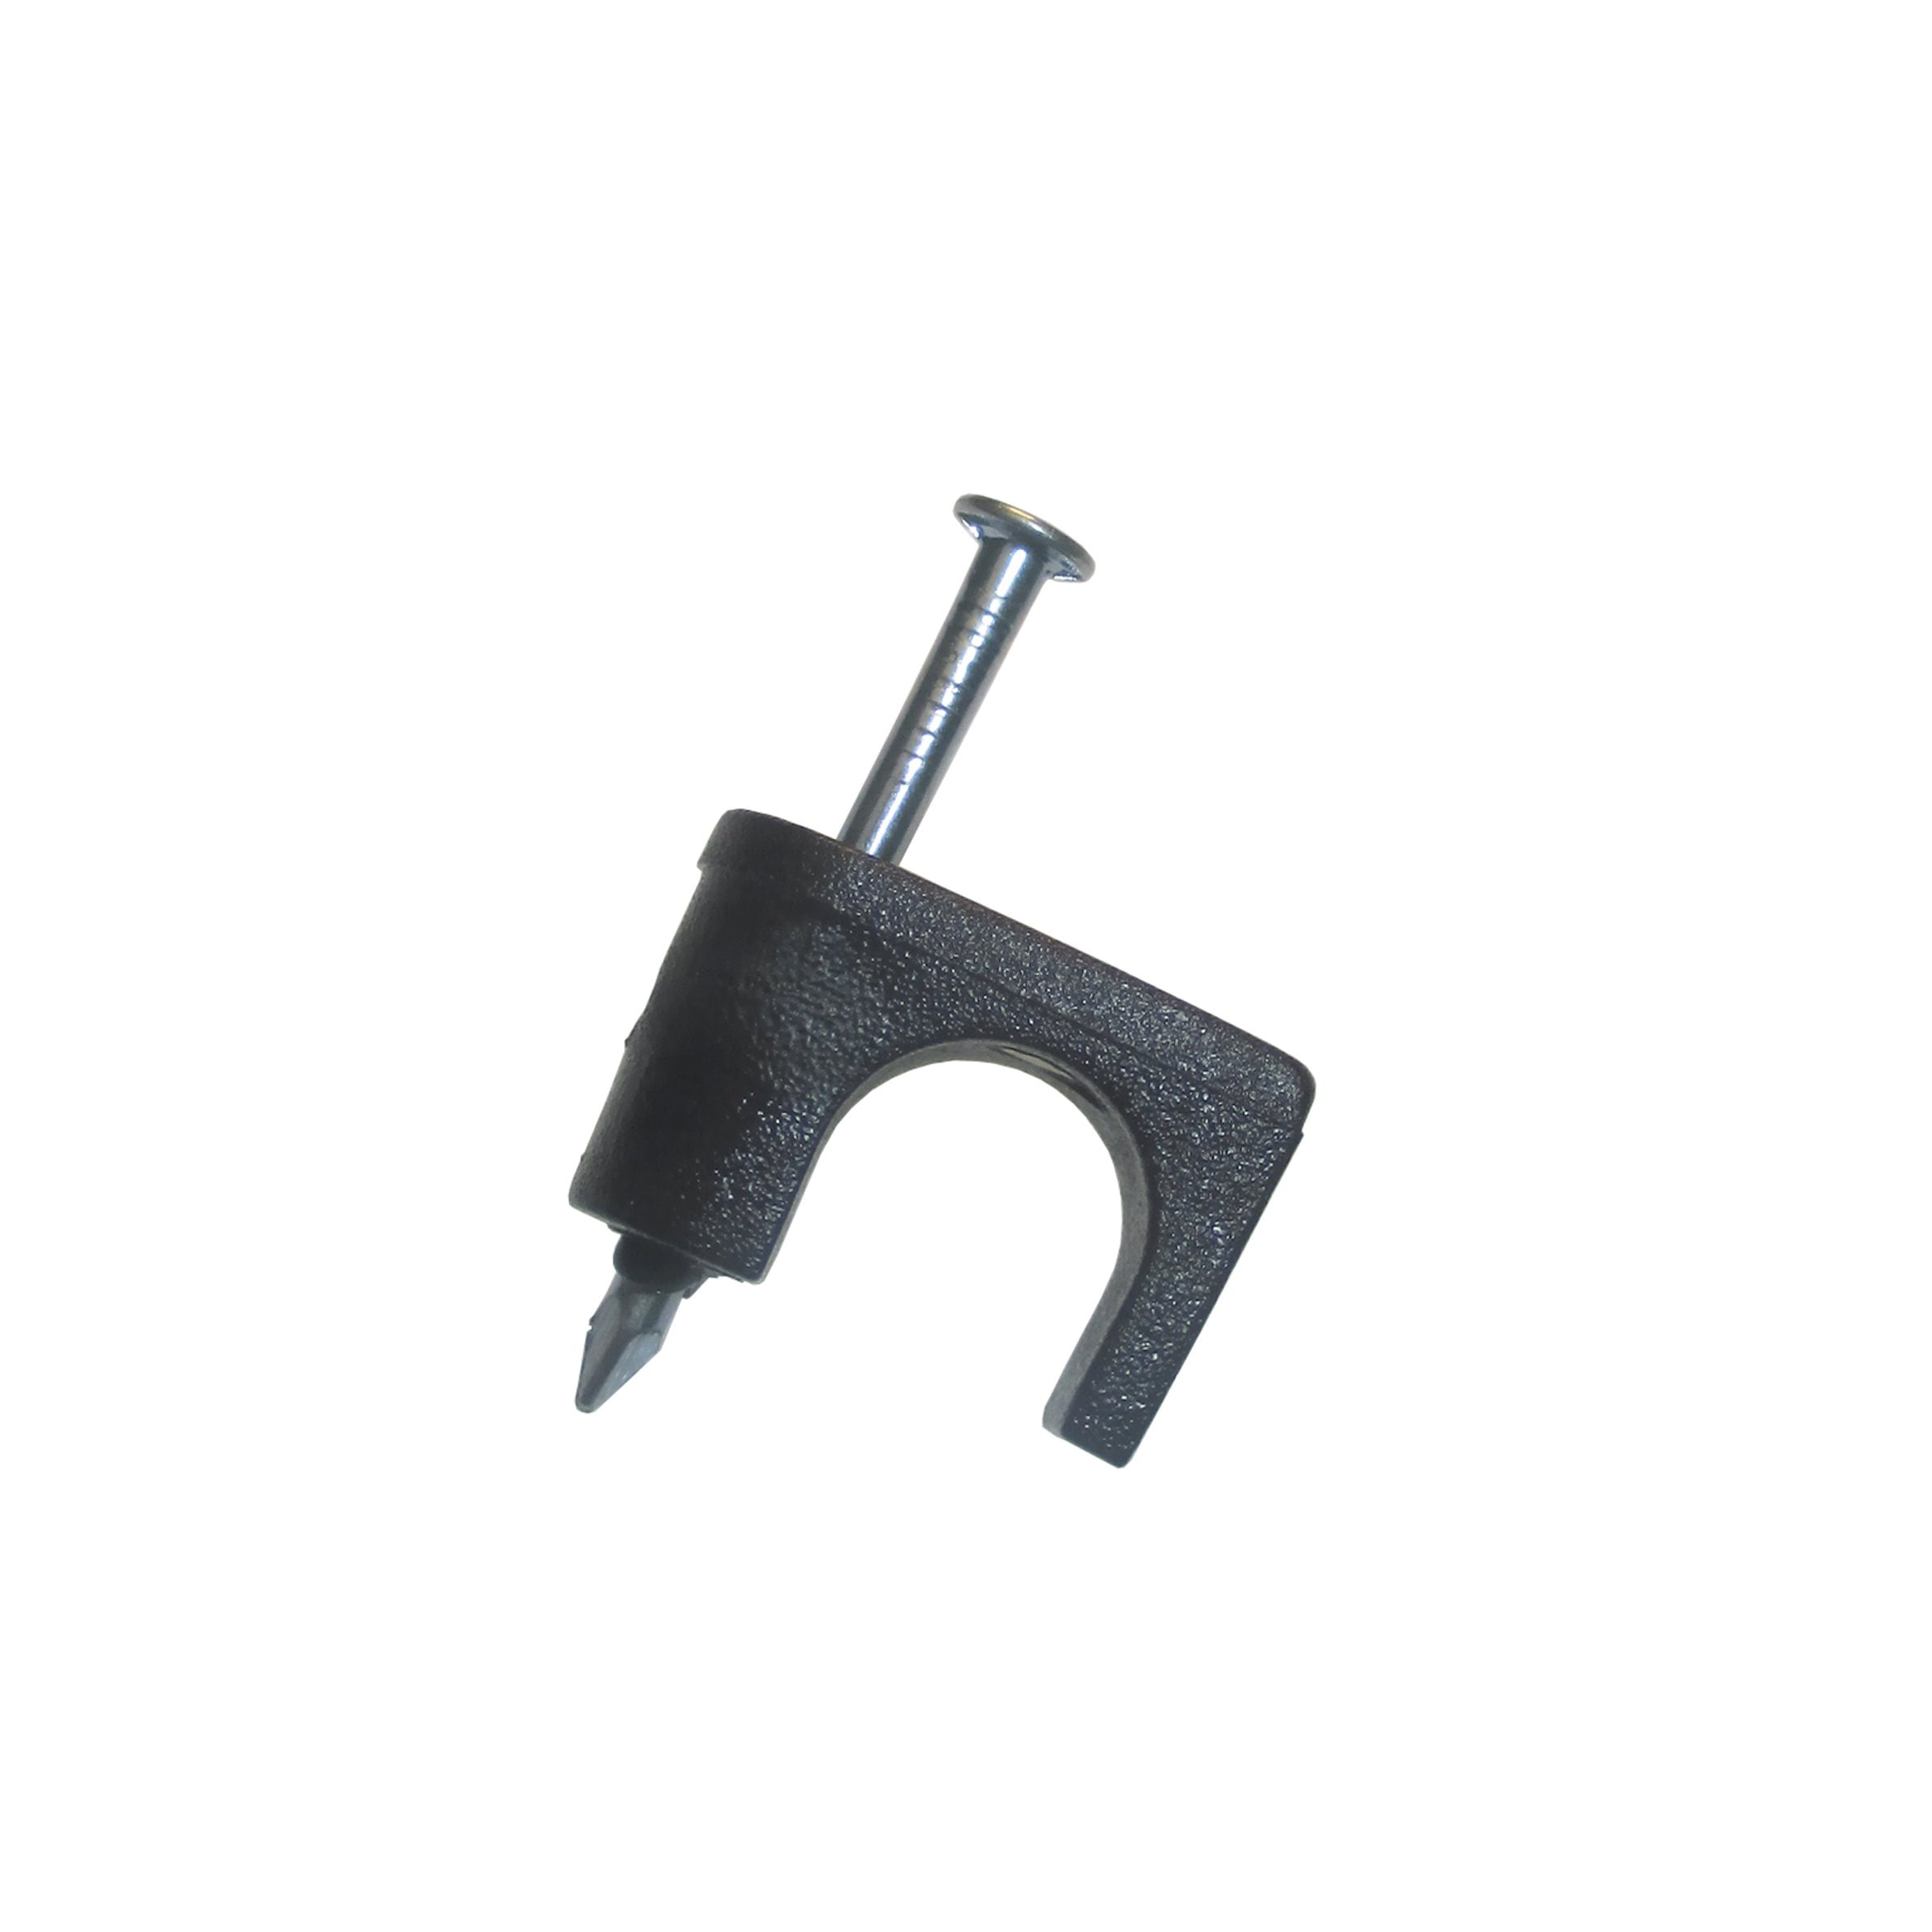 Gardner Bender PSB-1650T Plastic Coaxial Staple, Black, 1/4", Card of 25 - image 1 of 2